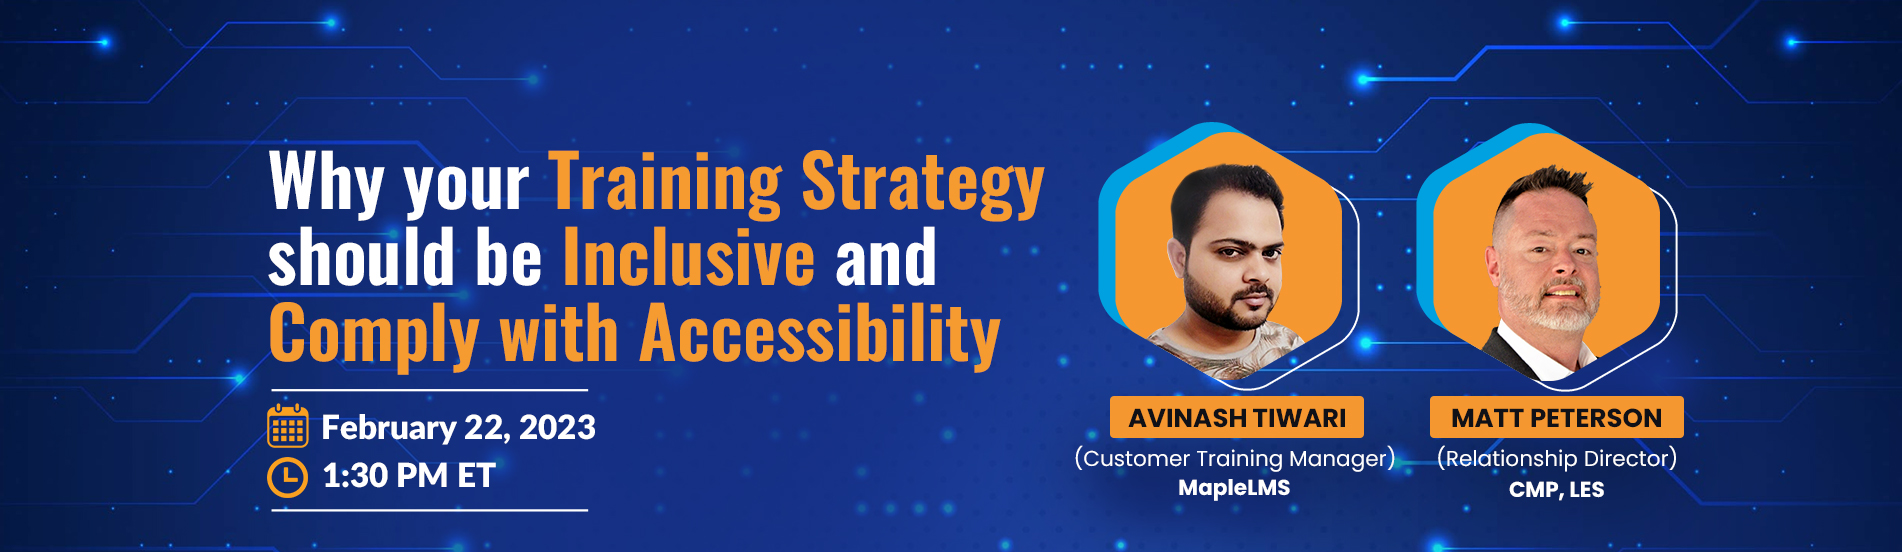 How to Ensure Accessibility for Specially-abled Learners with a Salesforce LMS?